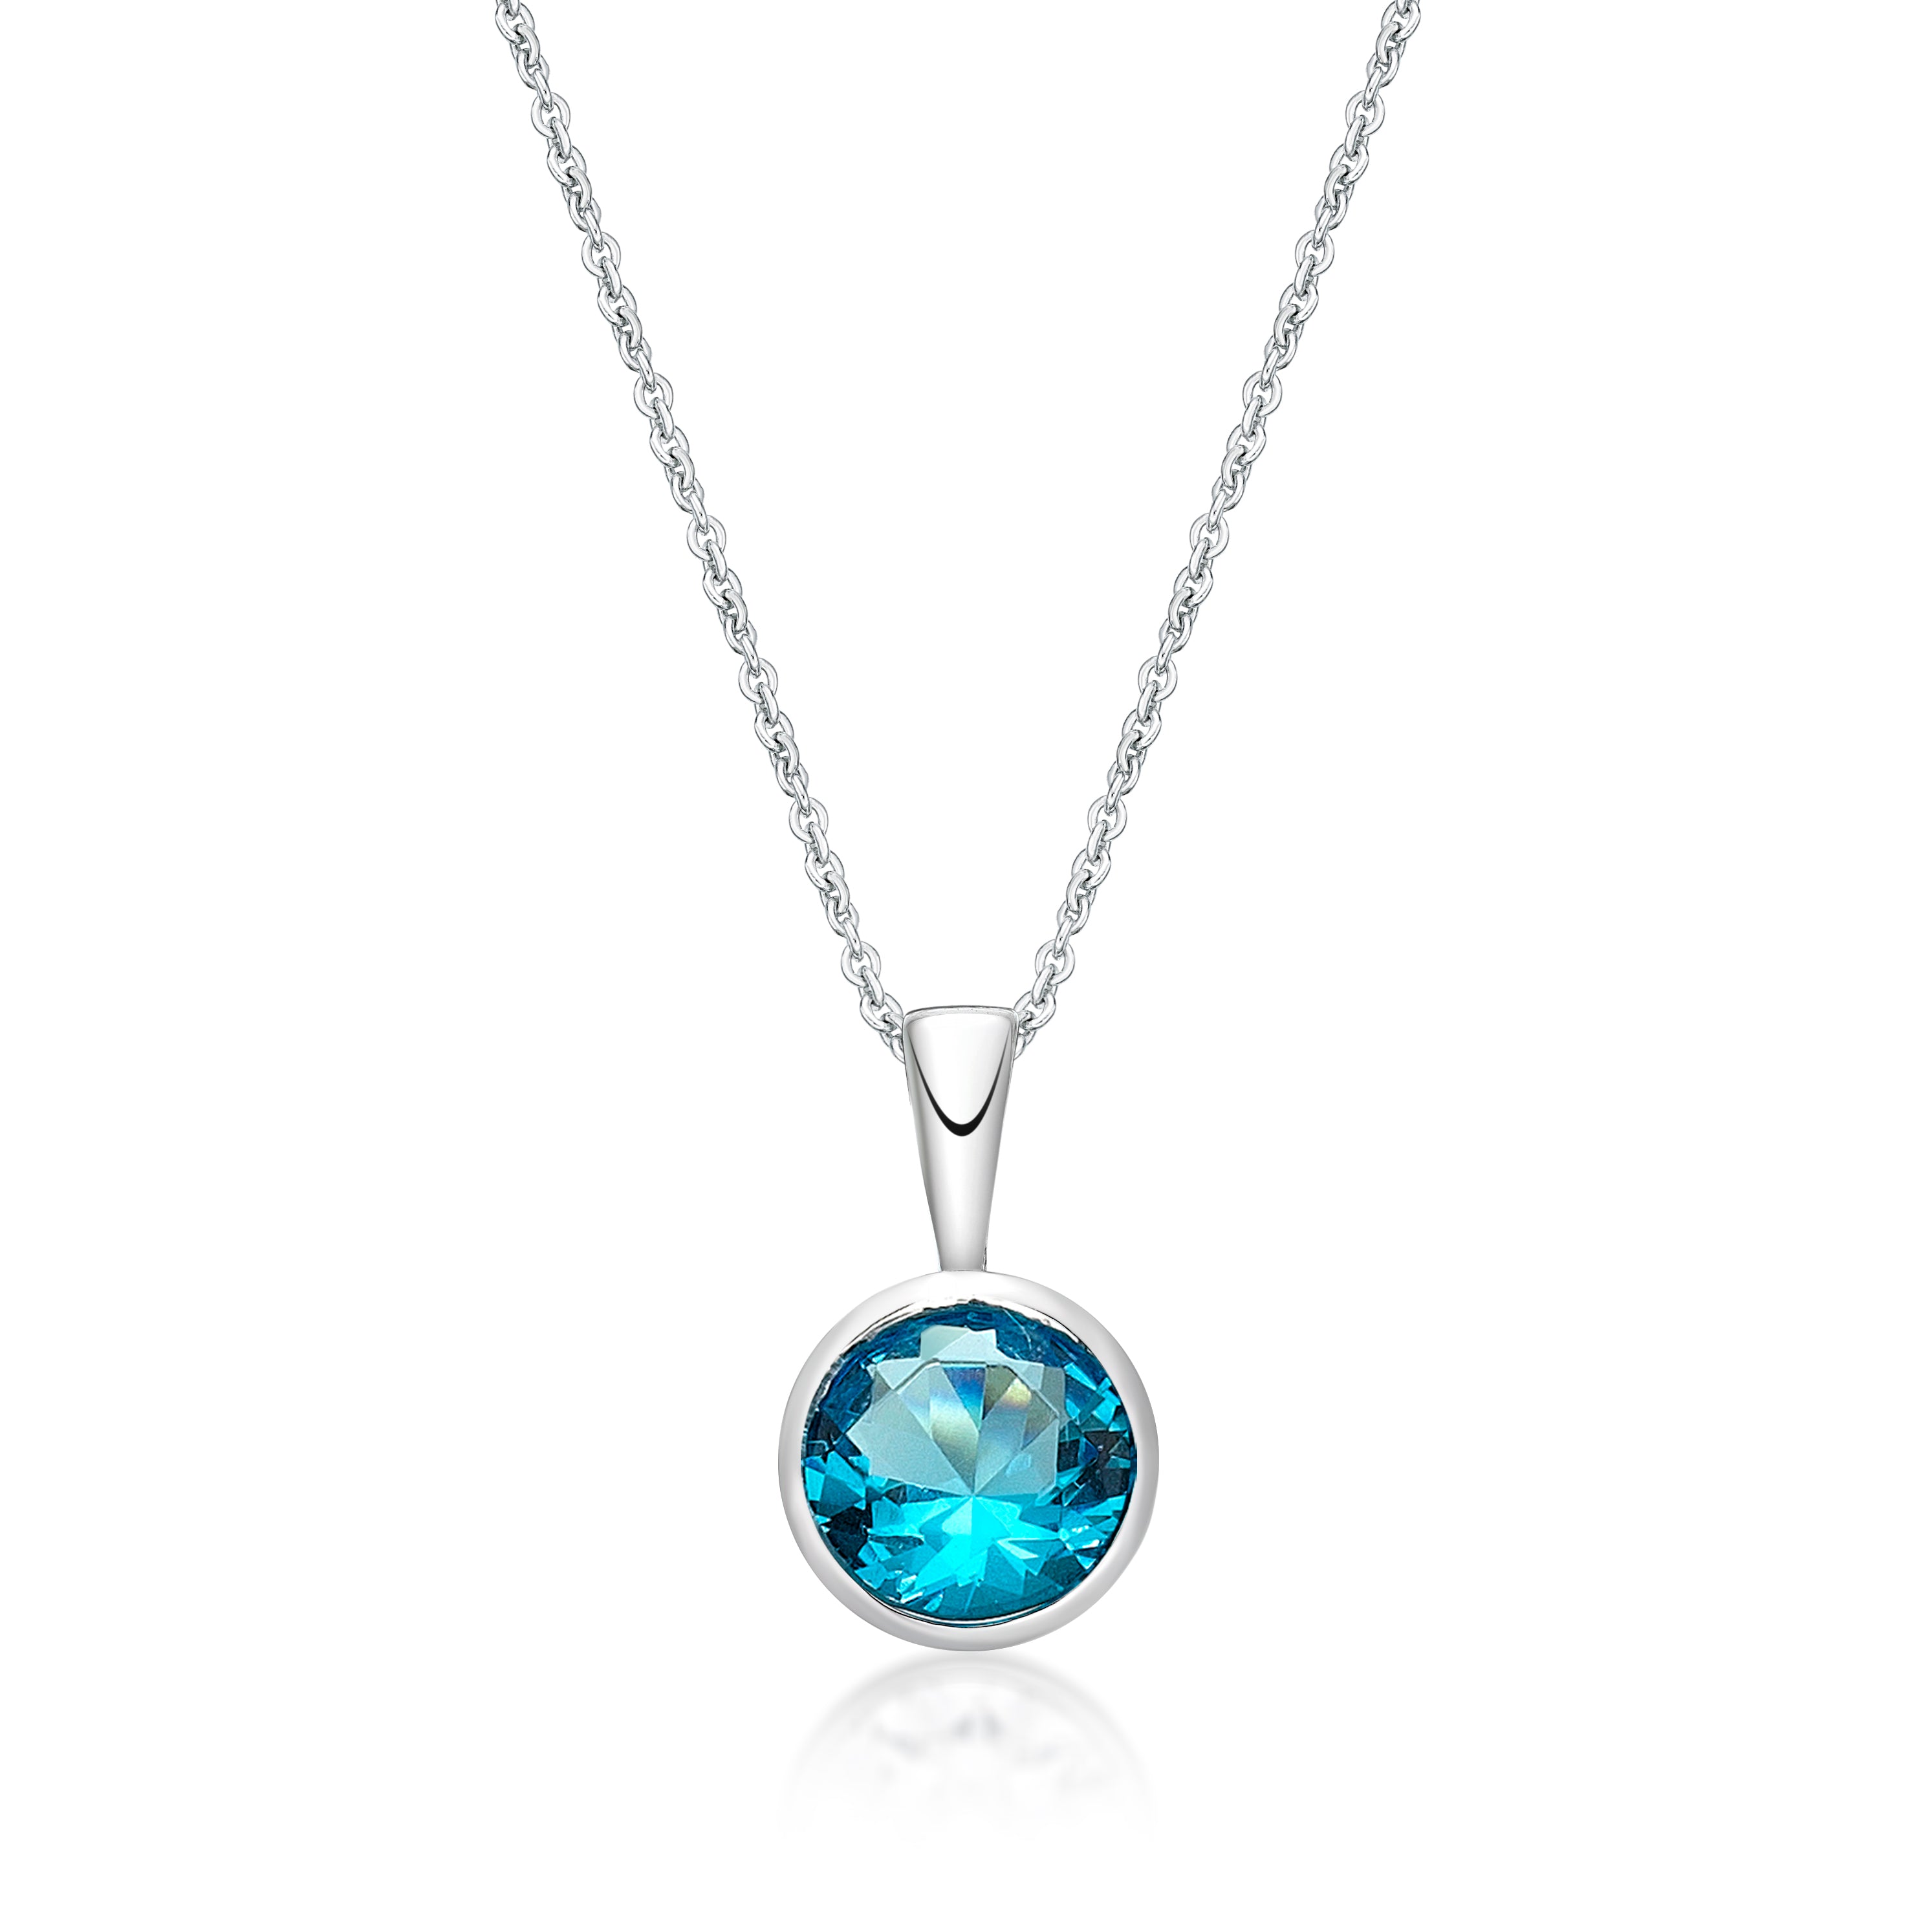 Sterling Silver December Birthstone Pendant and Chain